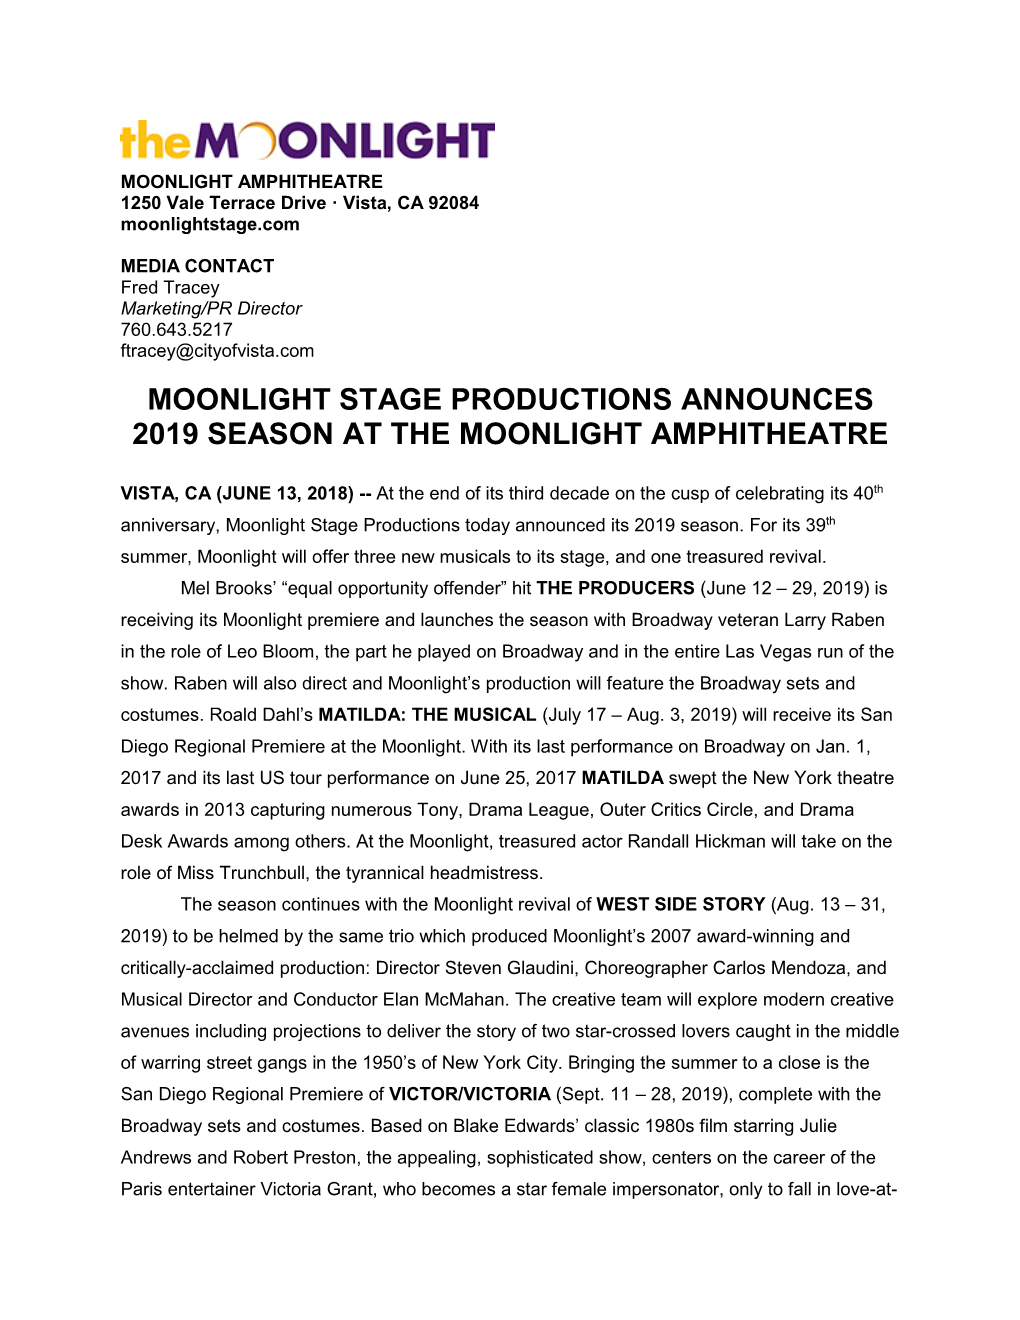 Moonlight Stage Productions Announces 2019 Season at the Moonlight Amphitheatre